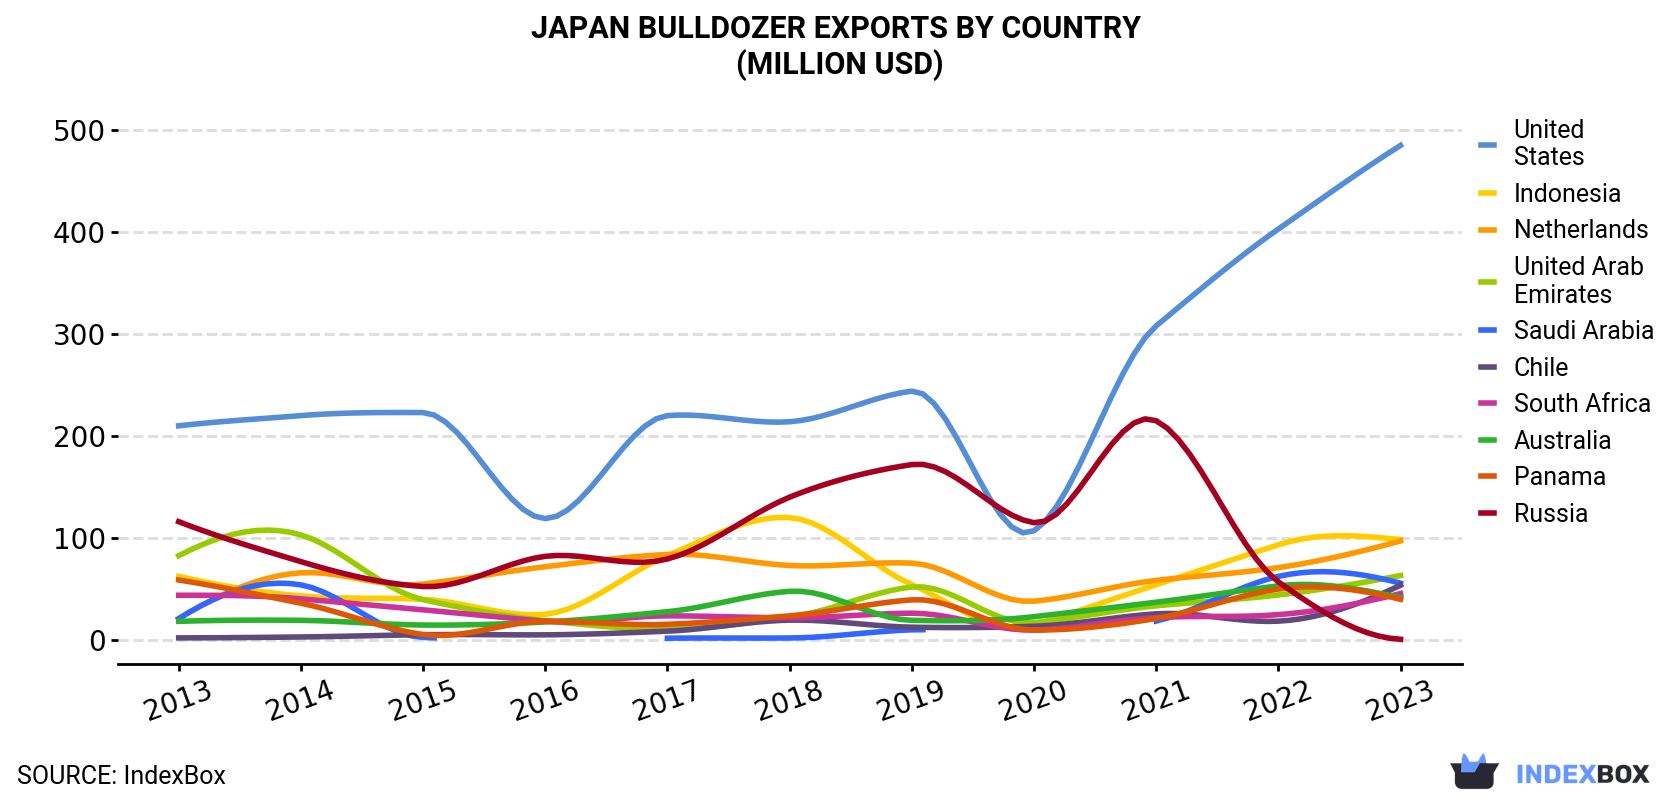 Japan Bulldozer Exports By Country (Million USD)